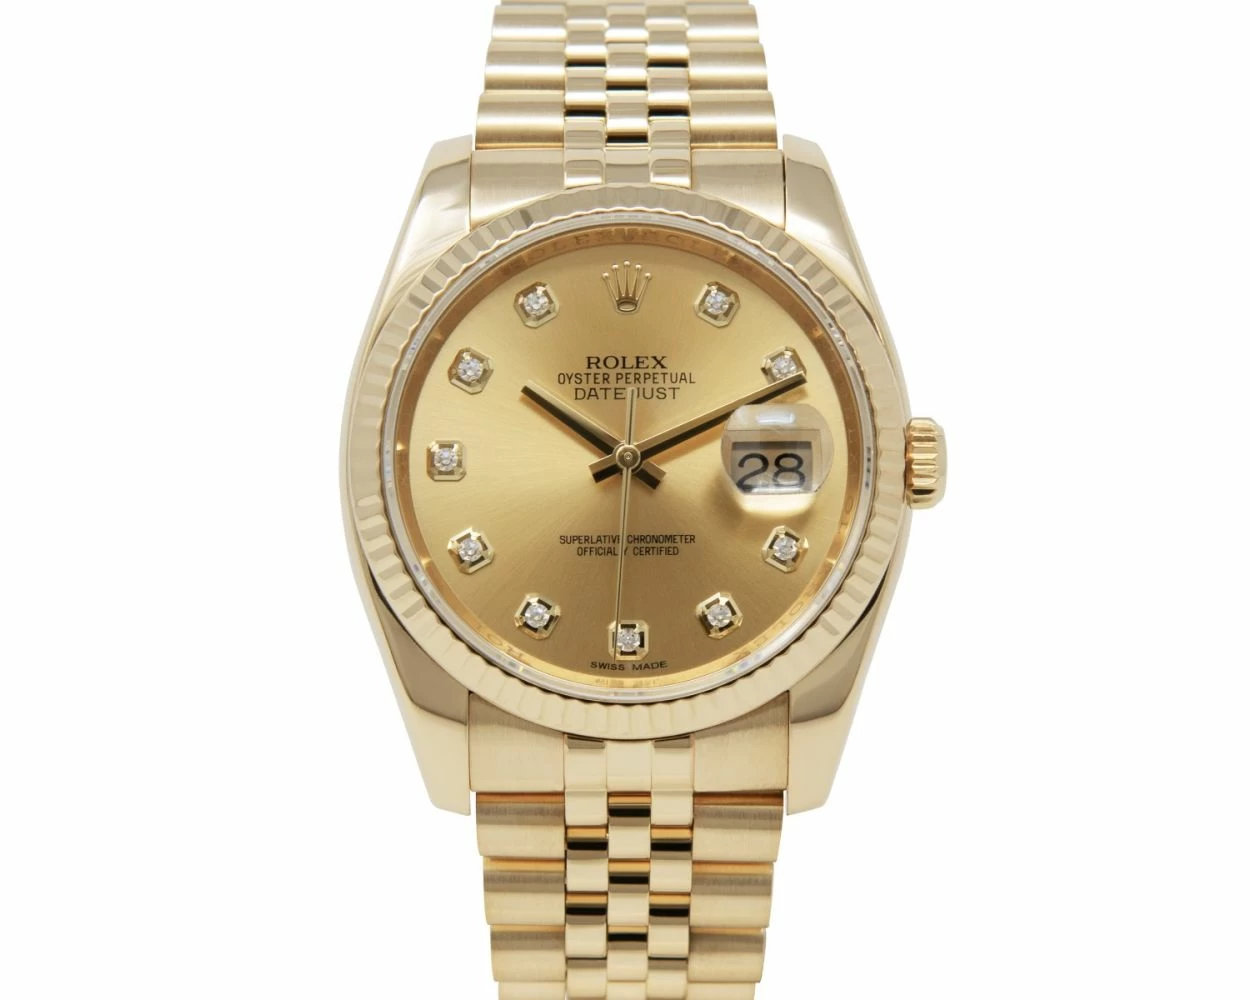 Rolex Oyster Perpetual Datejust 36 Champagne Dial 18K Yellow Gold Automatic  Men's Watch 116238CSJ